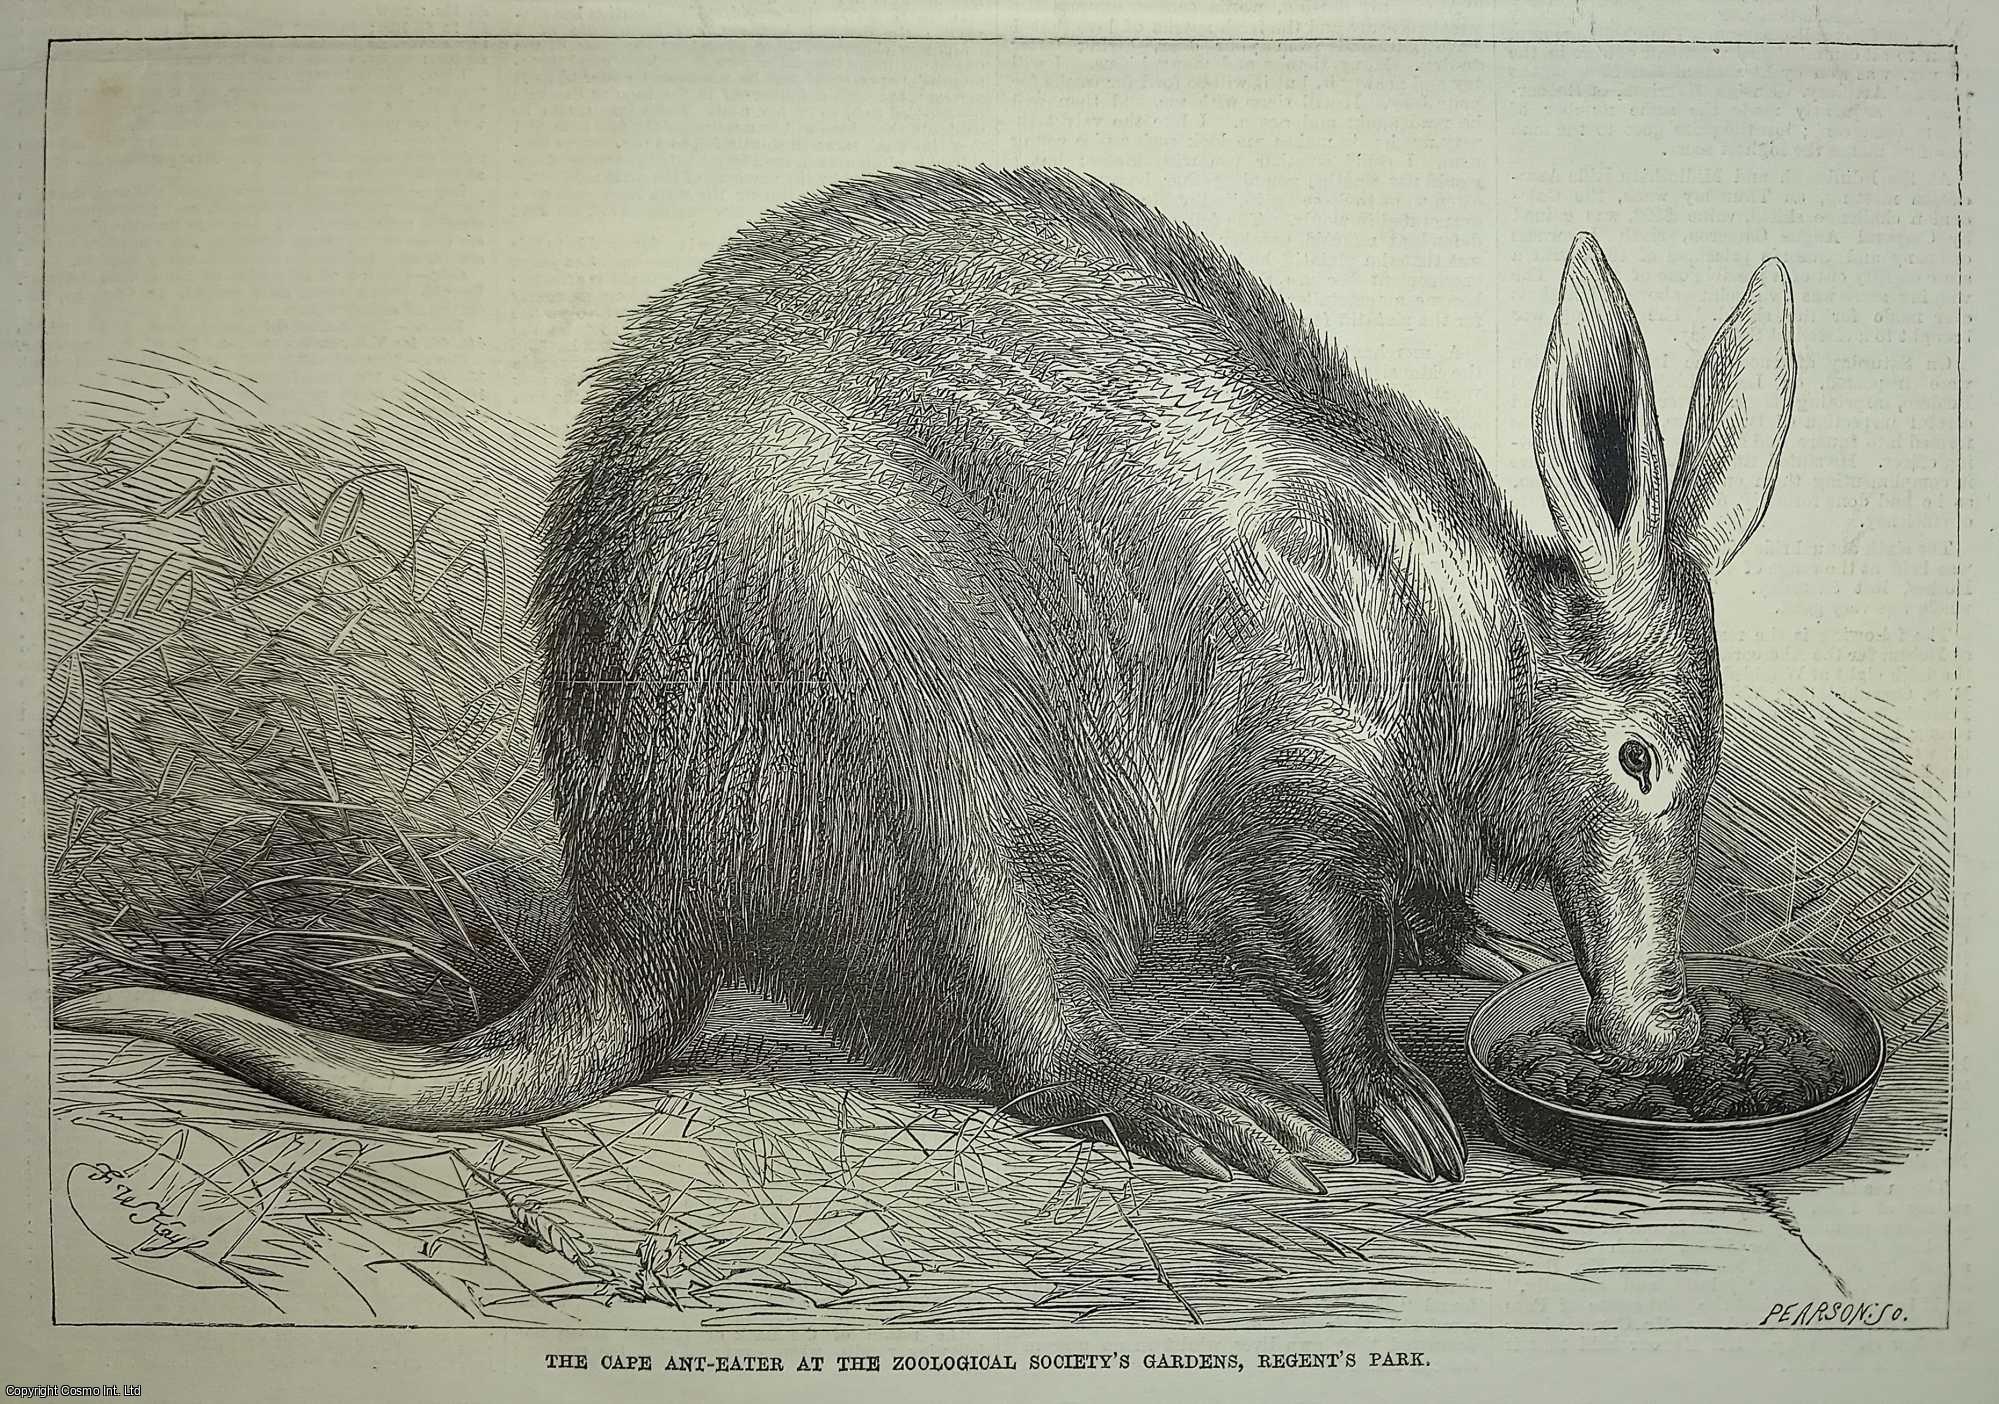 THE AARDVARK - The Cape Ant-Eater or Aardvark. An original woodcut engraving from the Illustrated London News, 1869.